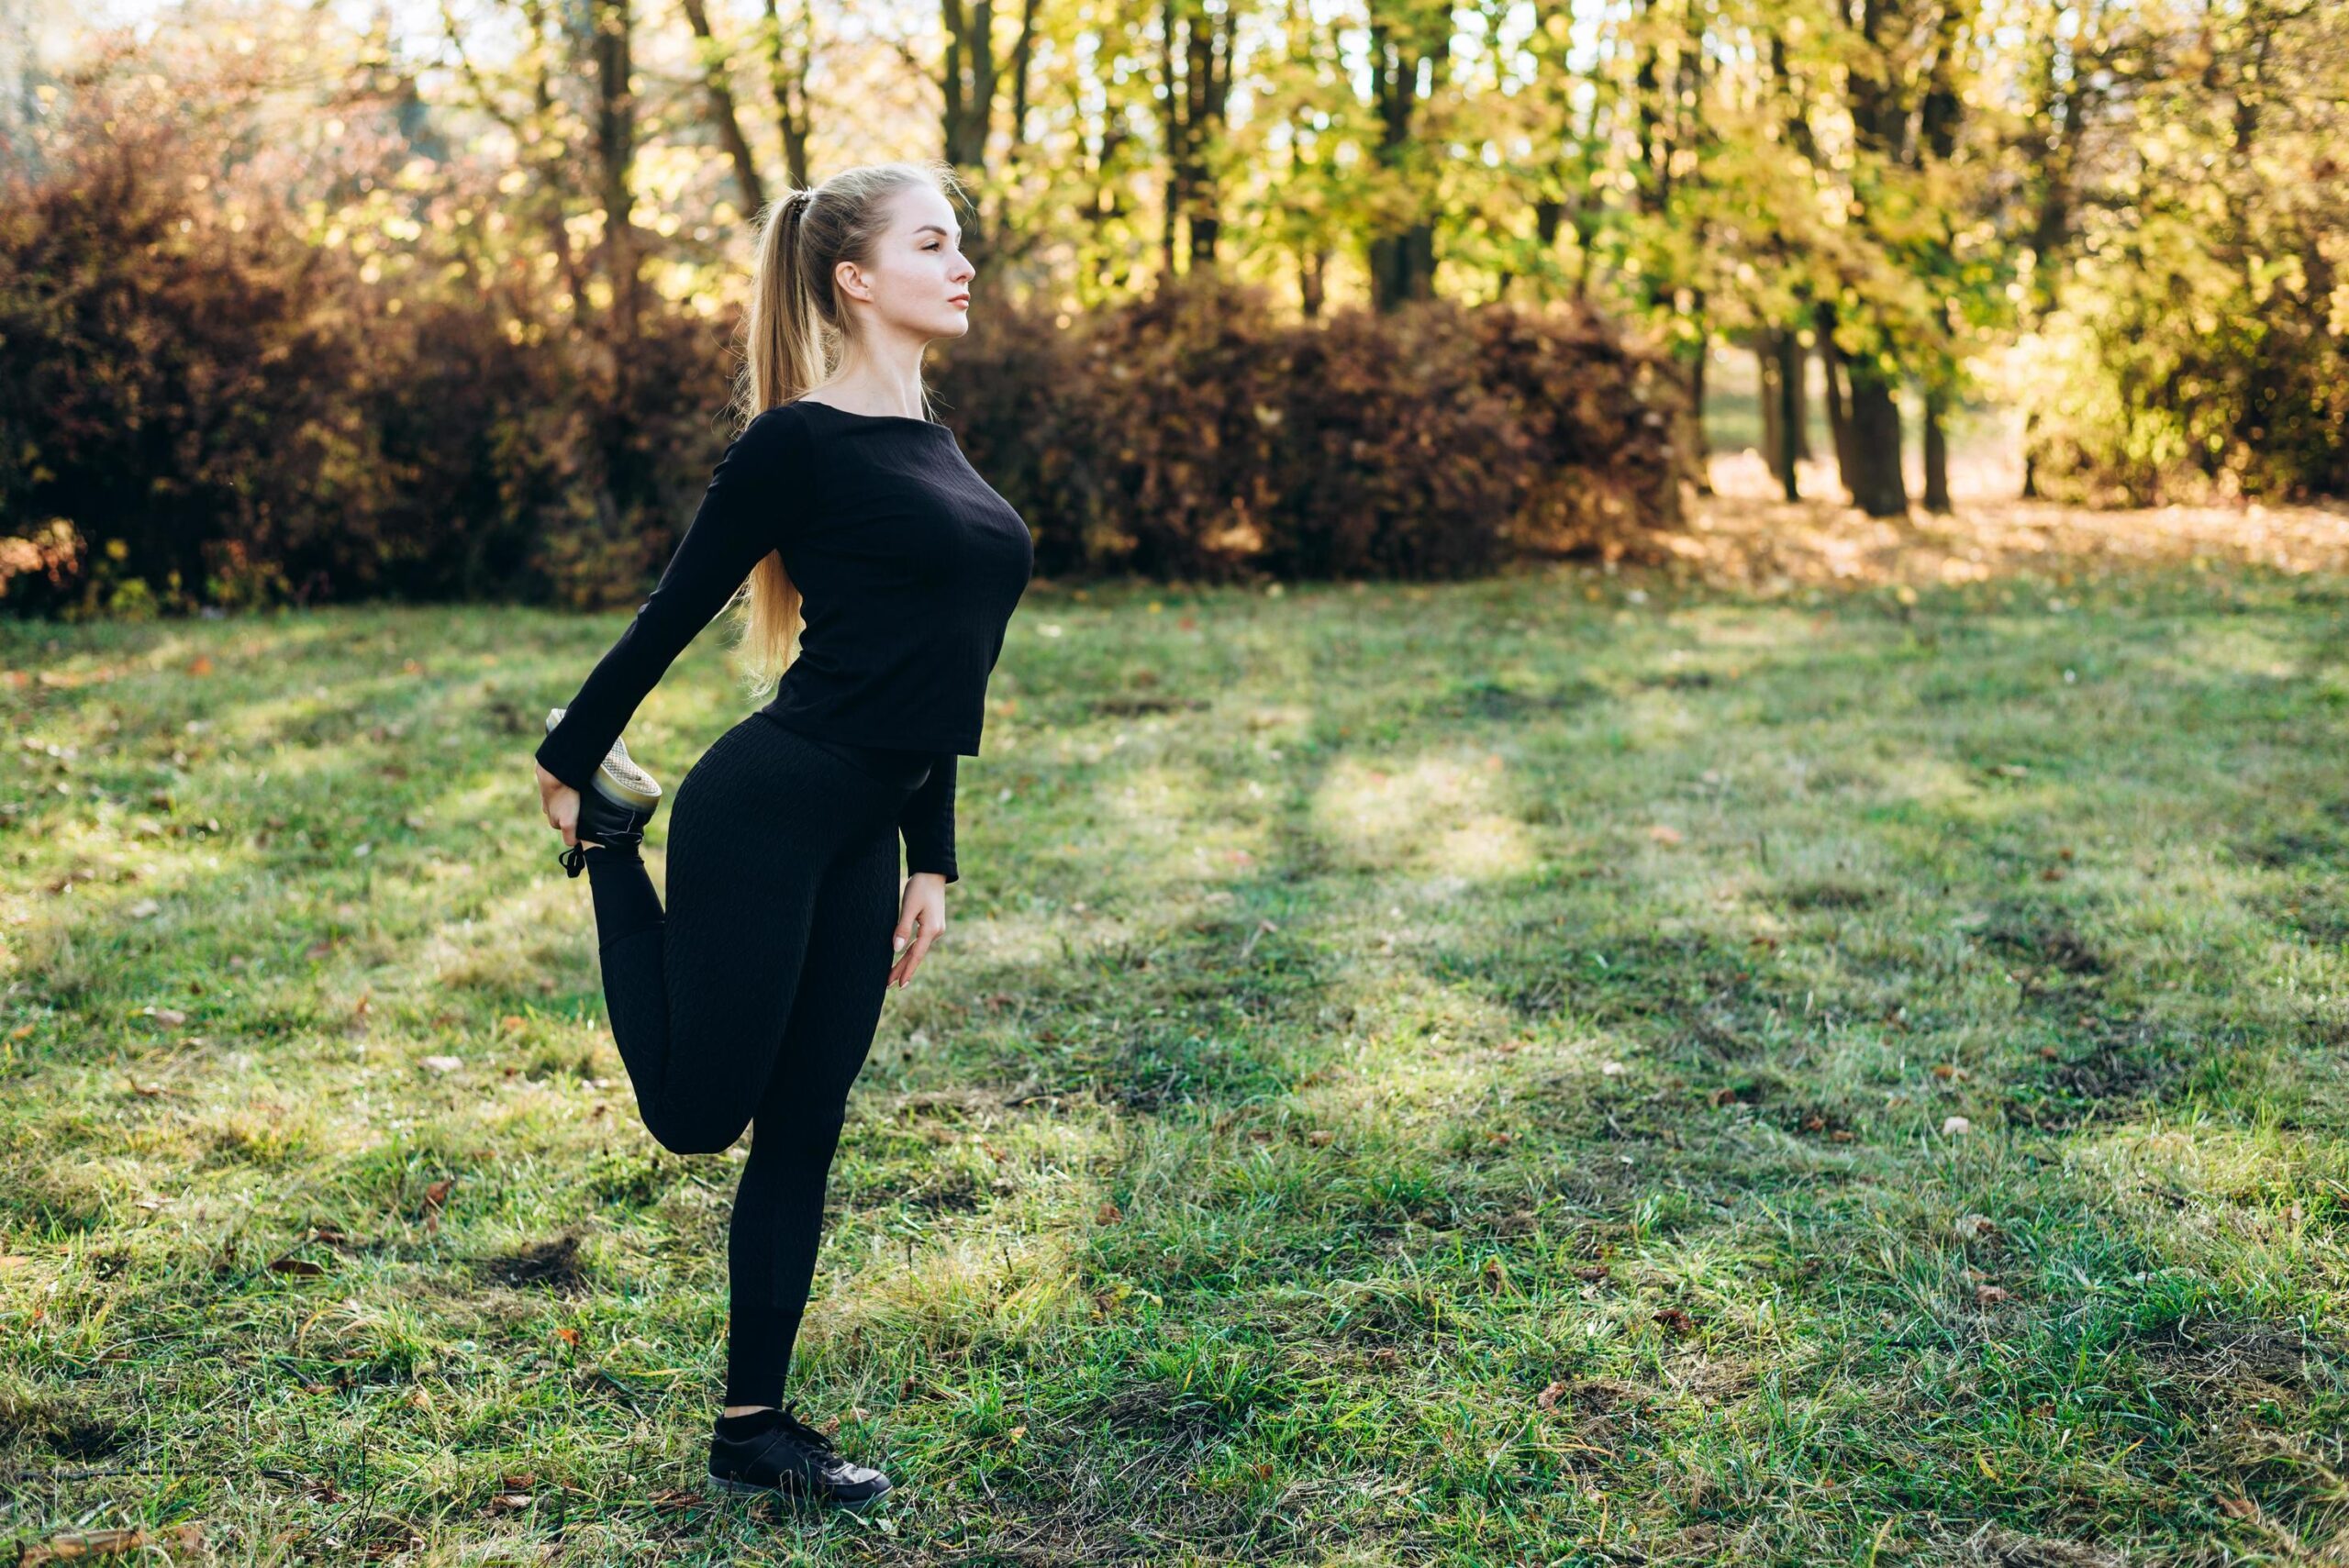 woman dressed in black training clothes stretching in a field